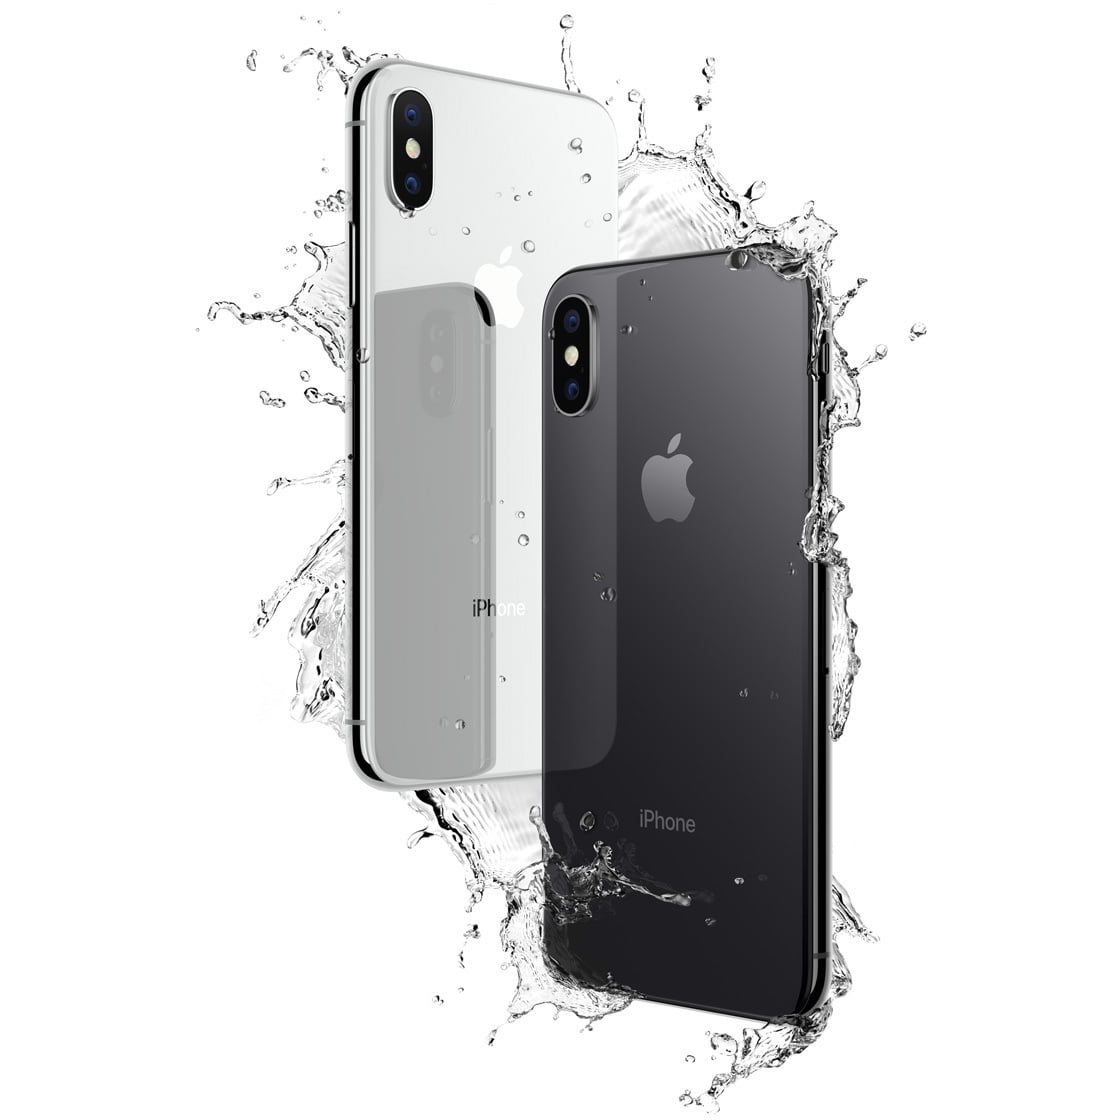 Restored Apple iPhone X 256GB, Space Gray - Locked T-Mobile